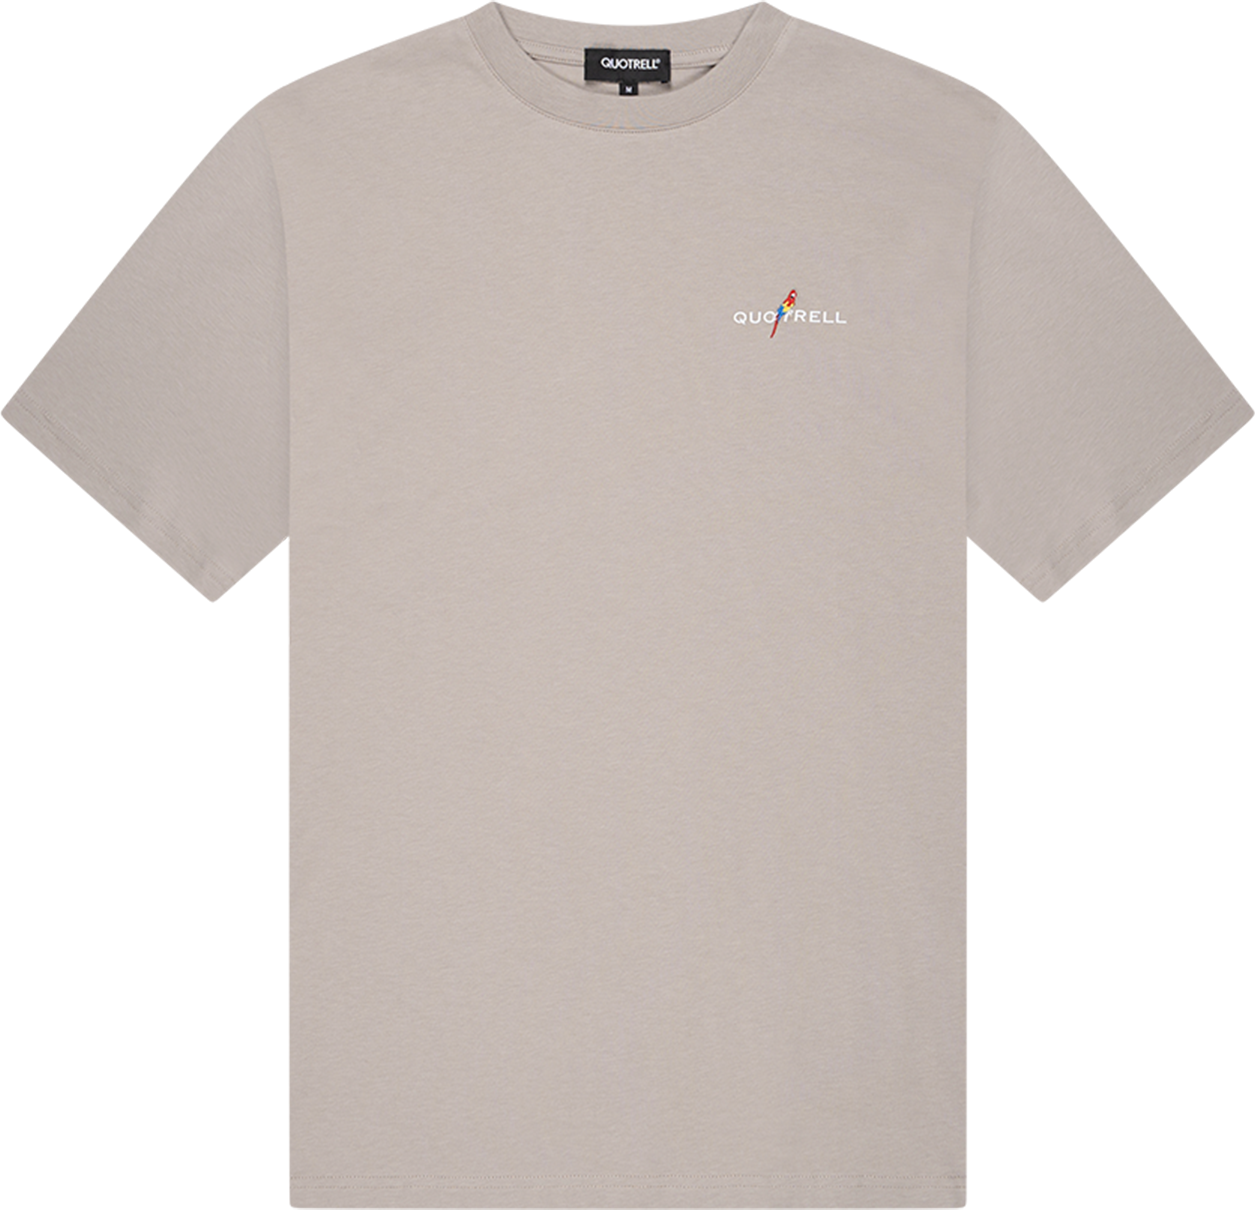 Quotrell Resort T-shirt | Taupe/off White Taupe